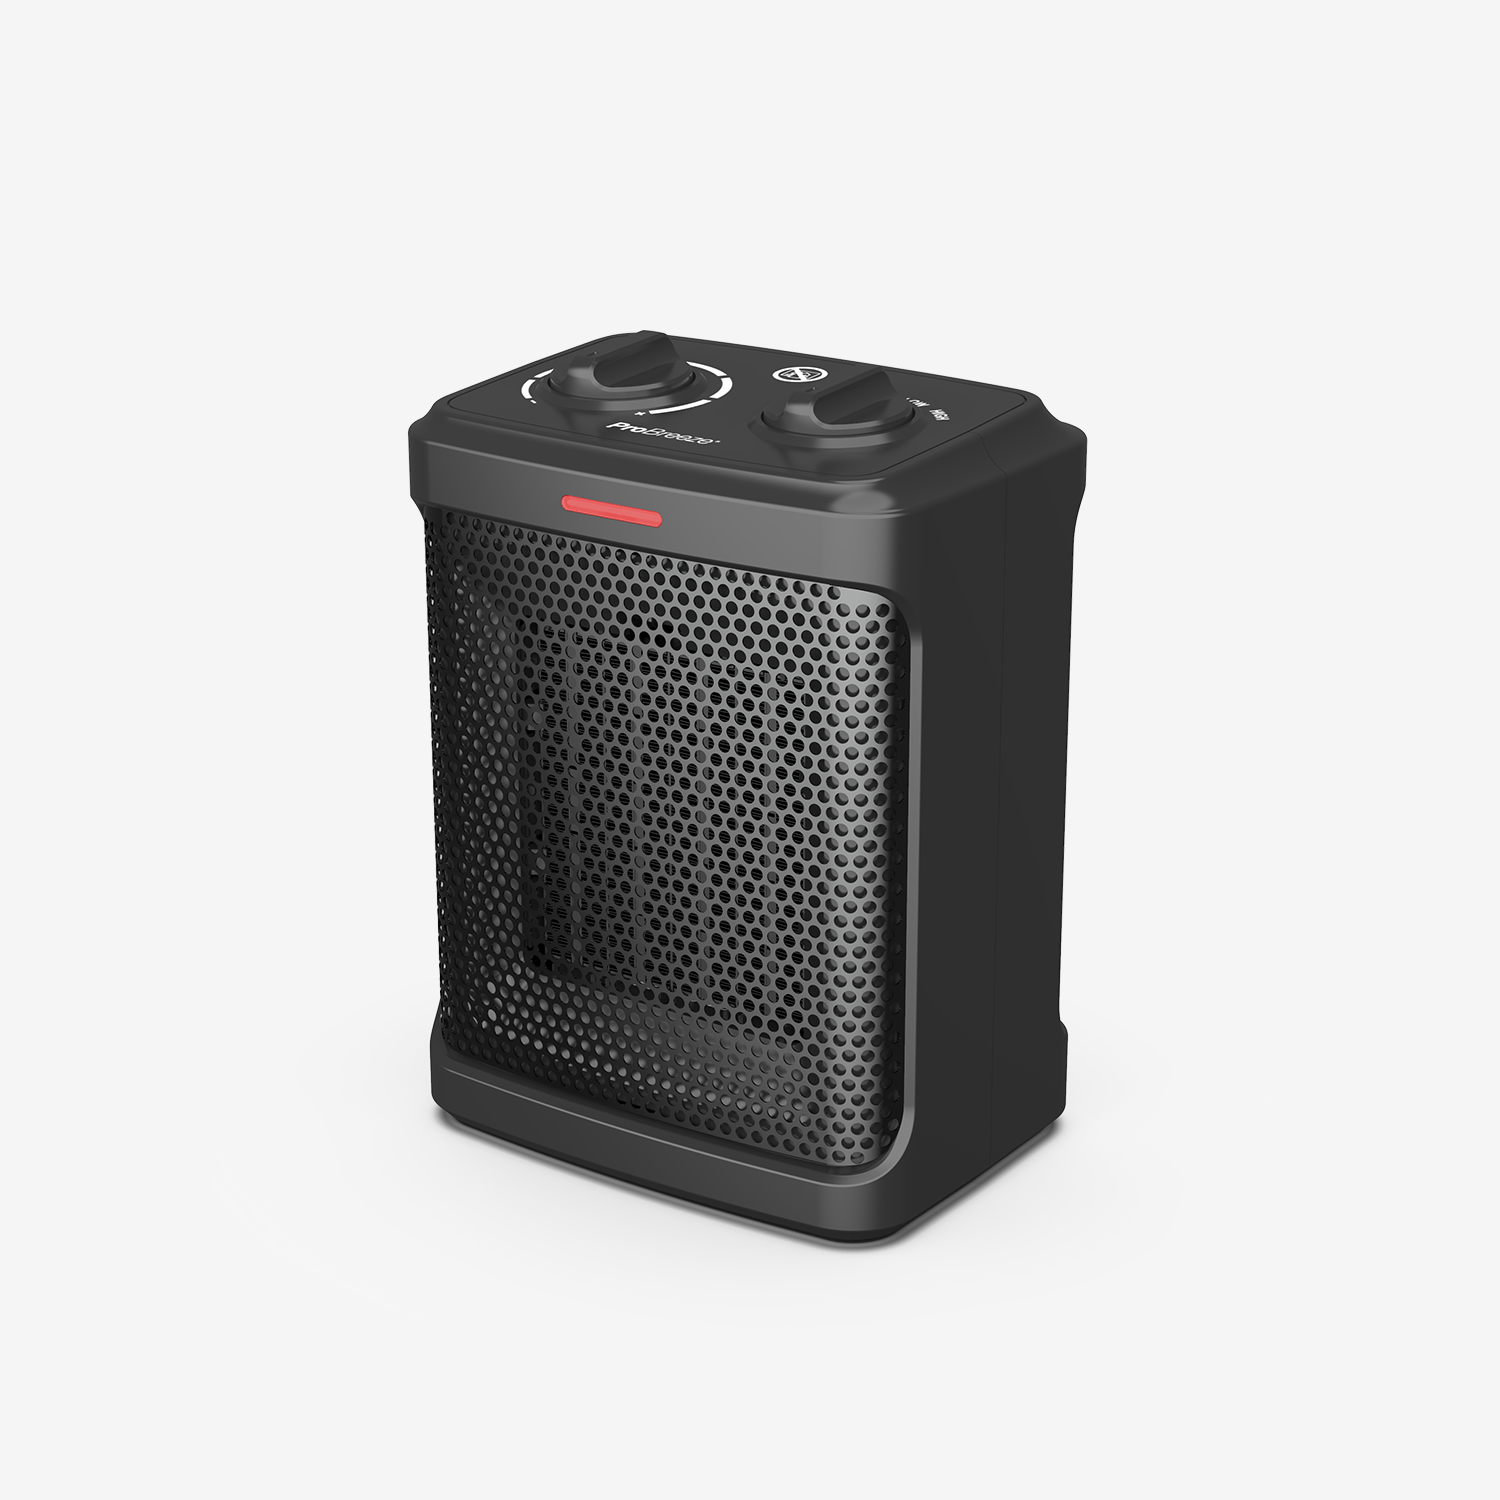 1500W Mini Ceramic Space Heater with 3 Operating Modes and Adjustable Thermostat - Black